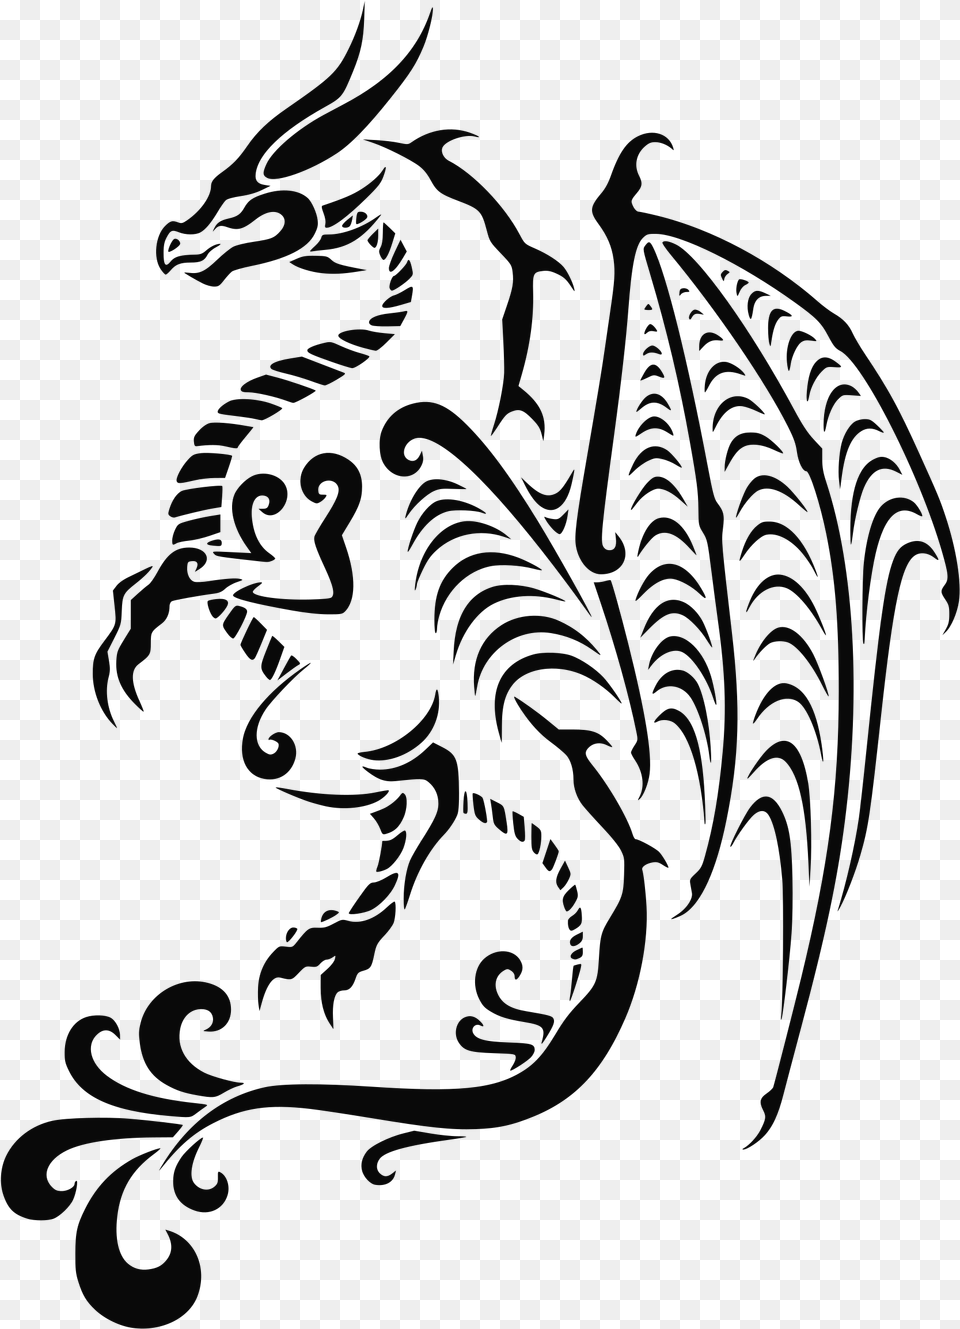 Dragon Tattoo Clip Arts Dragon Black And White Clipart Free Transparent Png